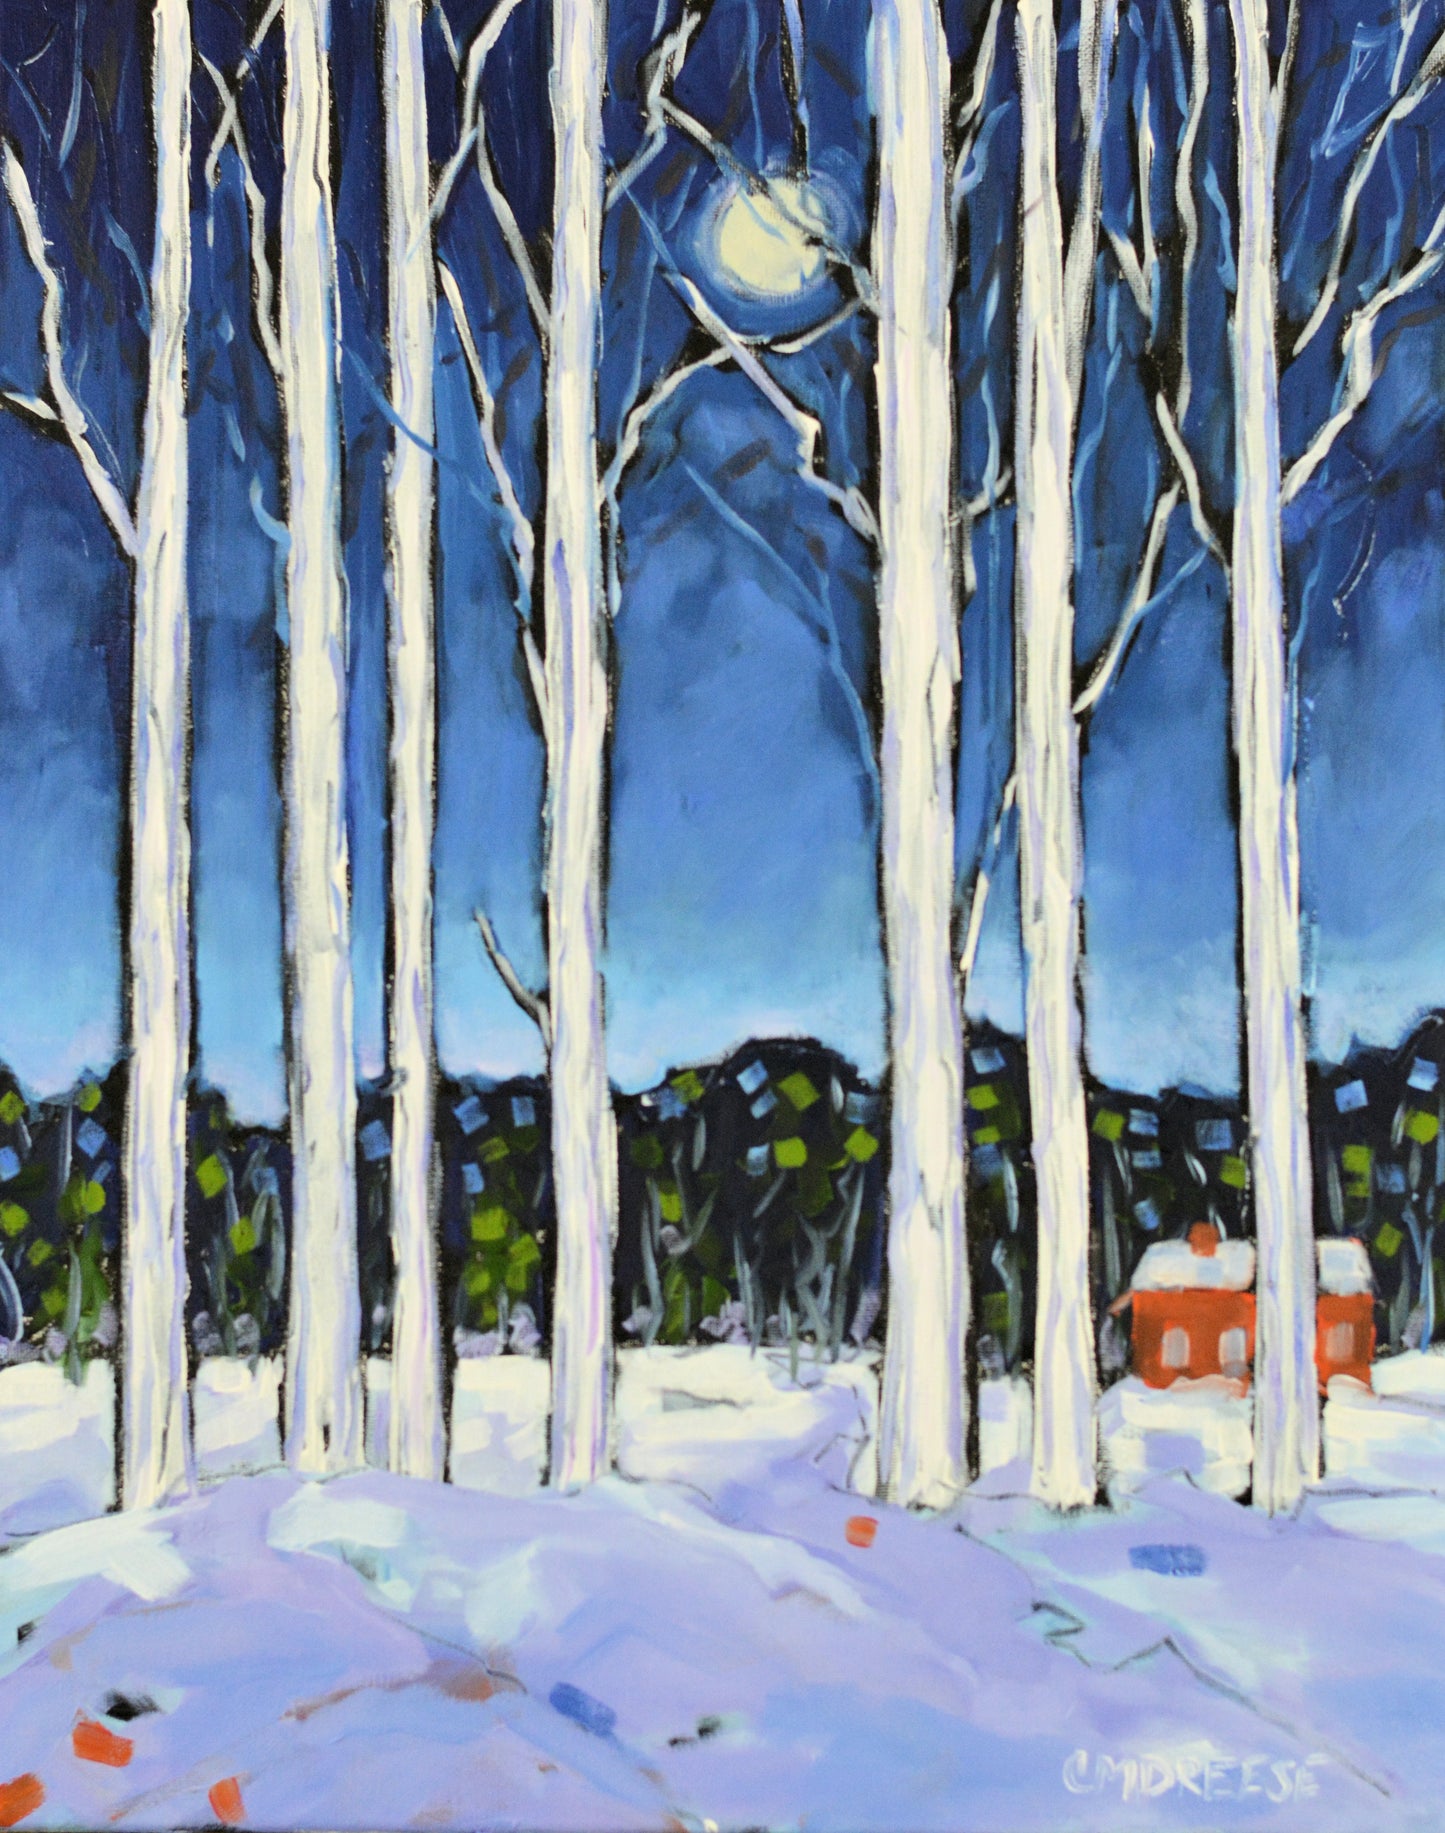 "Blame it on the Moon: Quiet Winter Woods" Oil Painting on Canvas